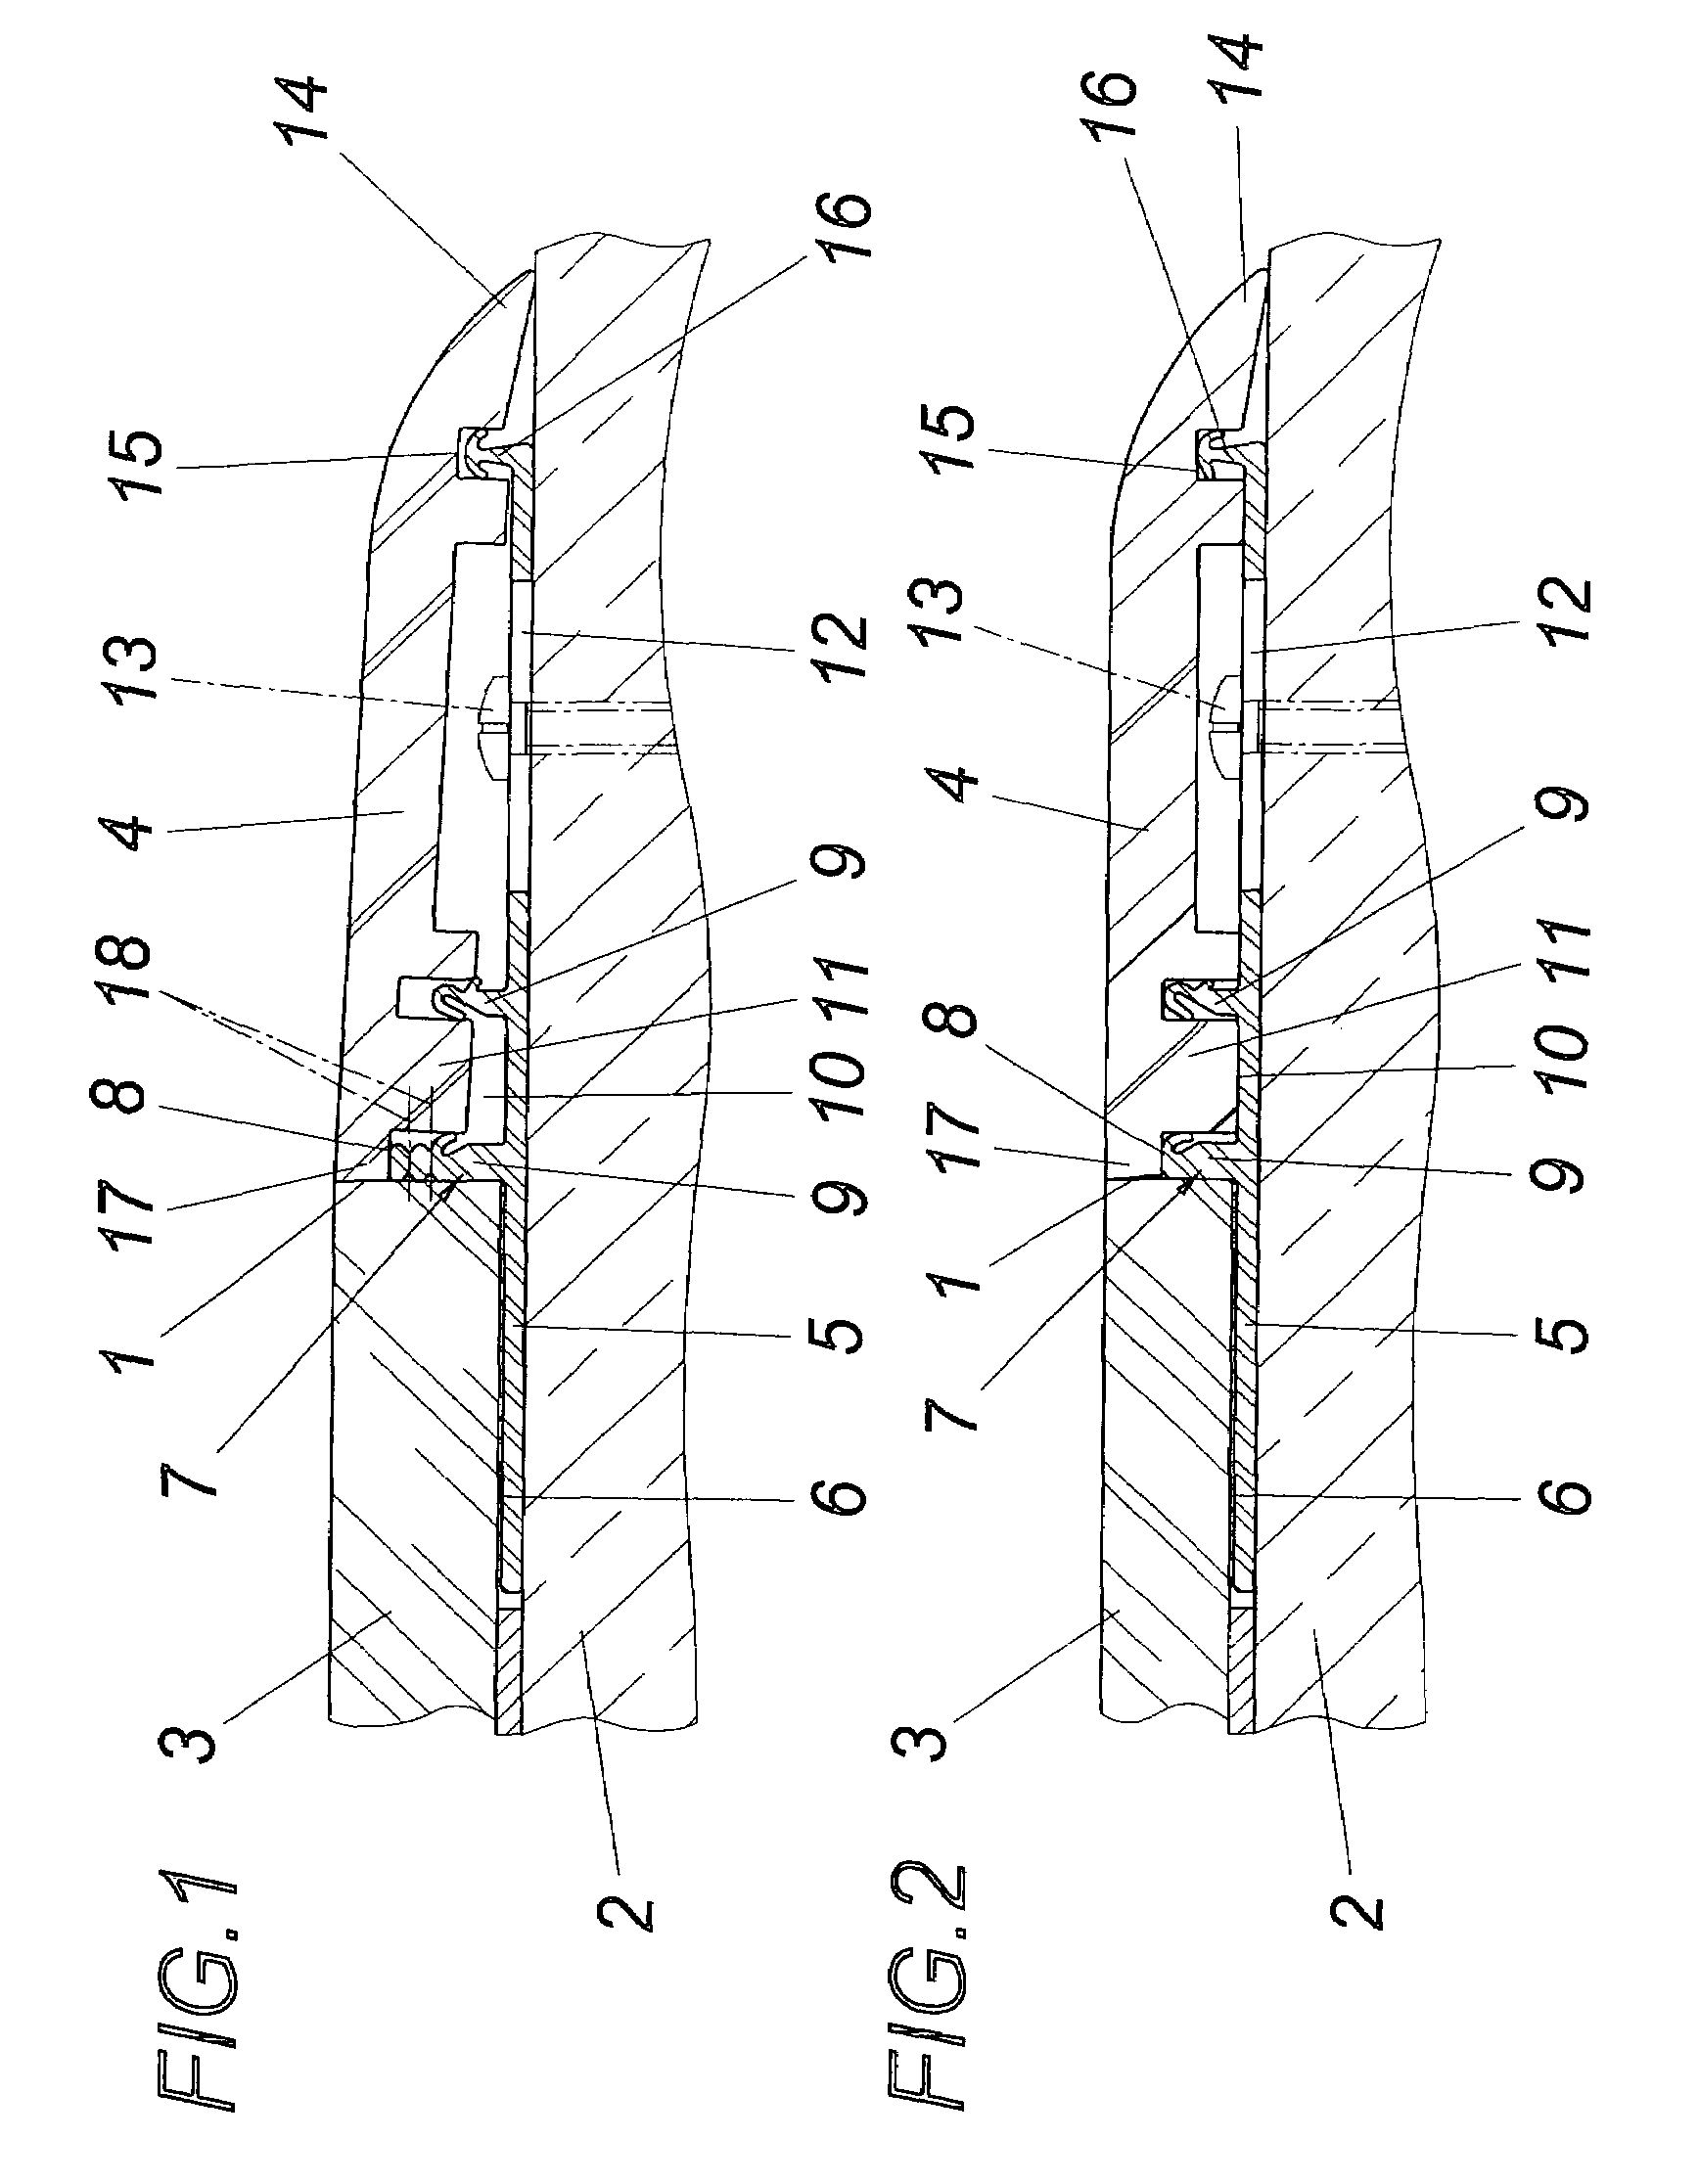 Device for frontal termination of a floor covering